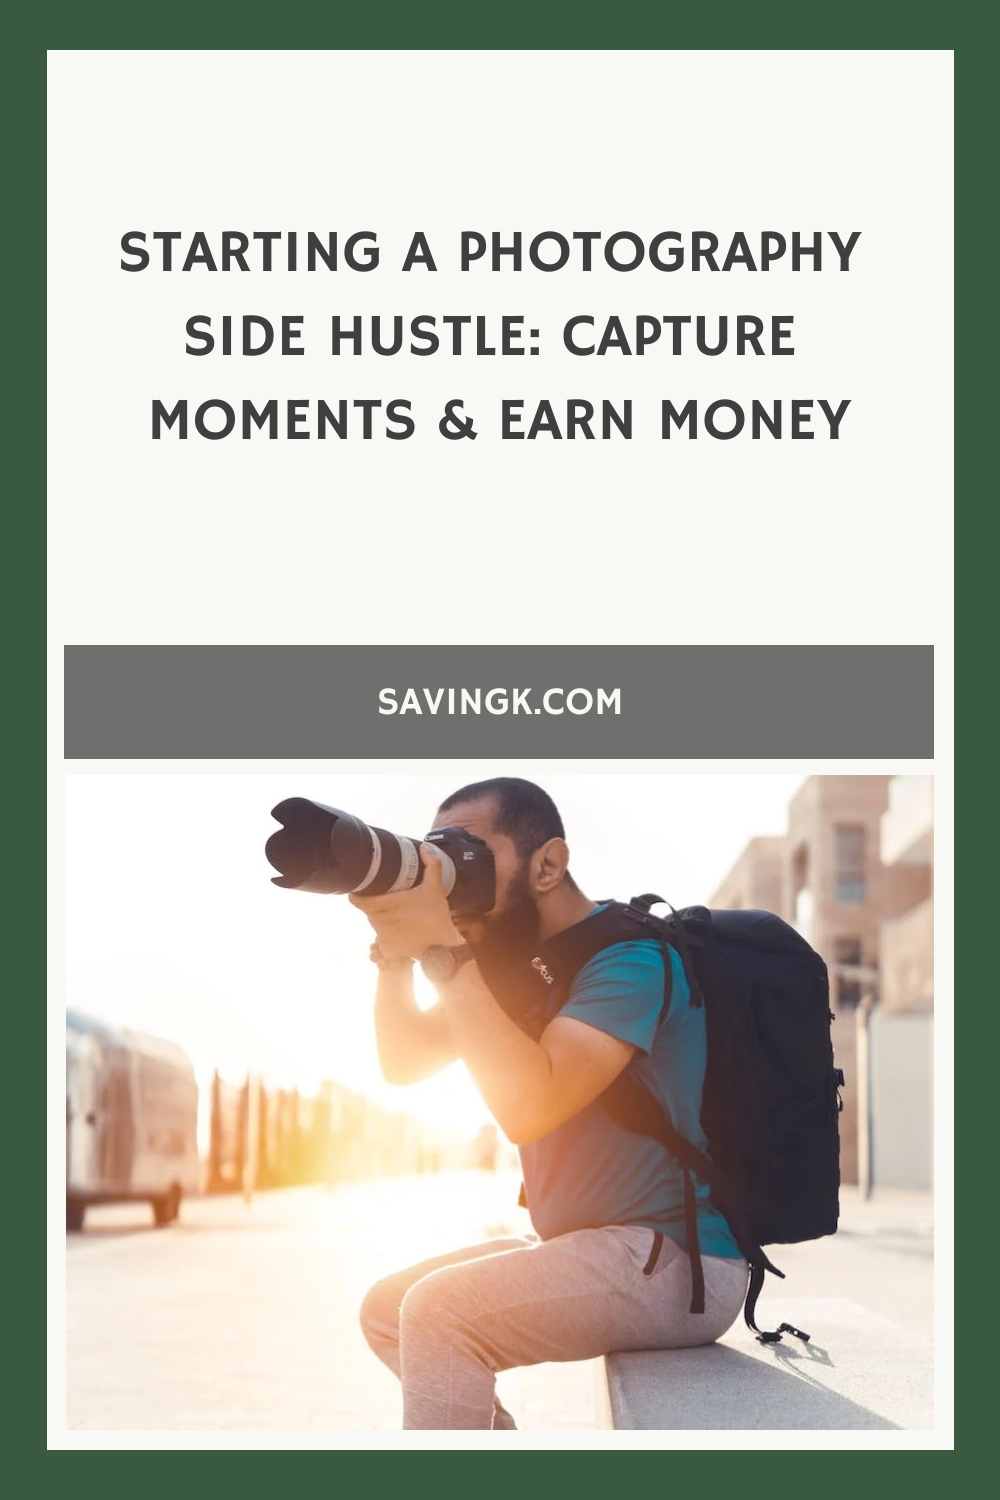 Starting a Photography Side Hustle: Capturing Moments and Earning Extra Income